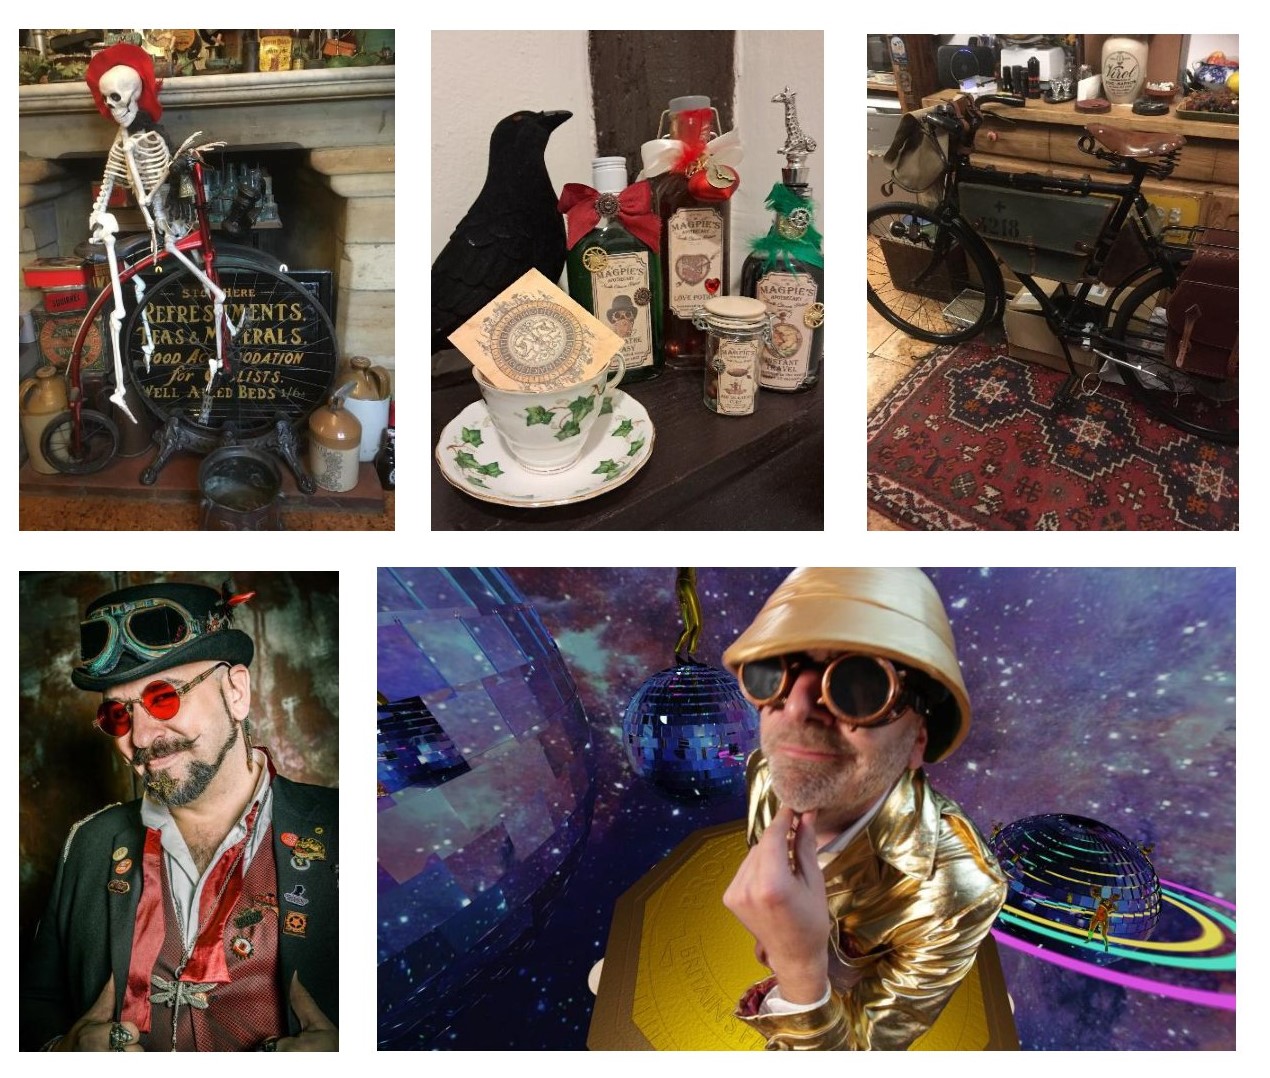 5 pictures, top left skeleton sitting on a bike, top middle crow, tea cup and potion bottles, top right bike wooden furniture and red carpet in the background. Bottom left man in bowler hat with glasses on, he is wearing glasses with red lenses. Bottom right man in gold jacket and domed hat, looking at the camera. 